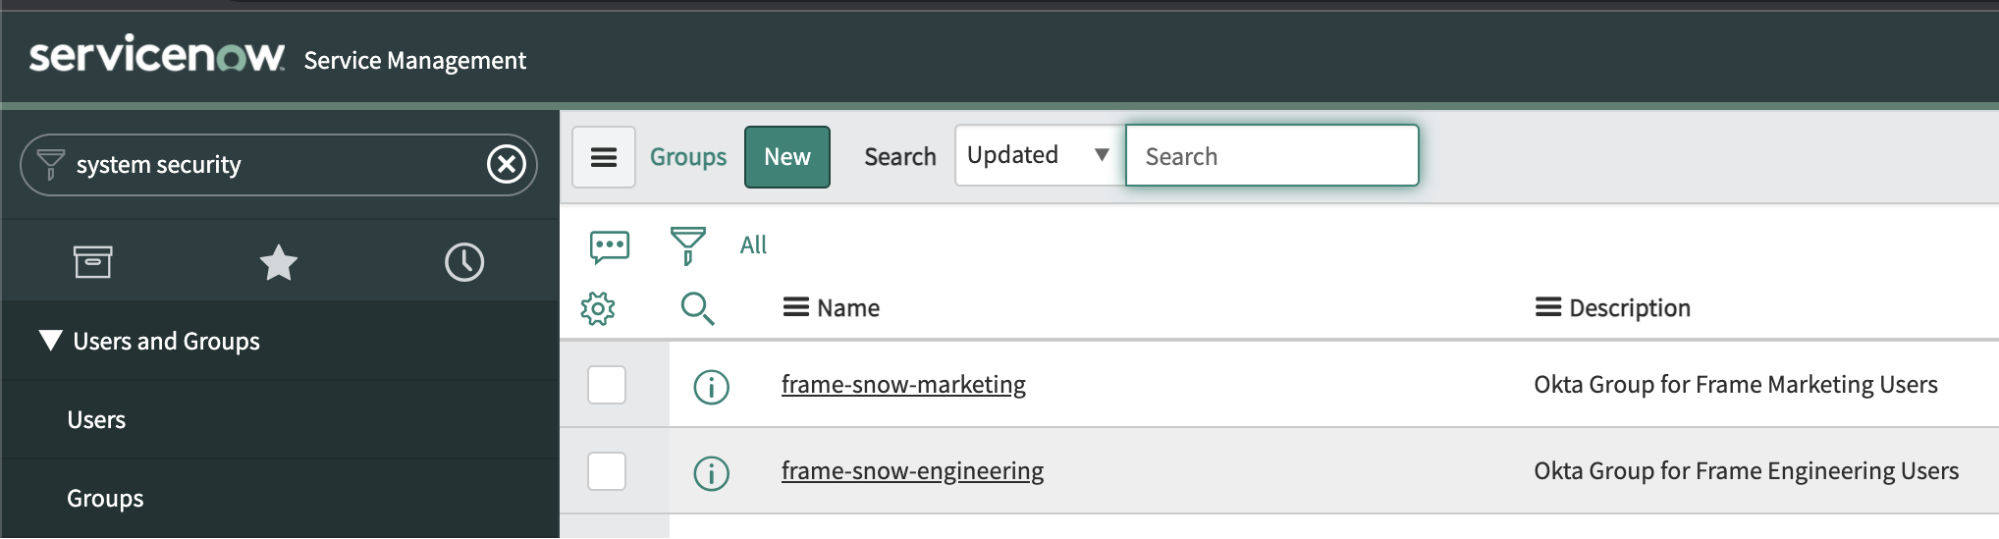 Created Frame Engineering and Frame Marketing ServiceNow Groups